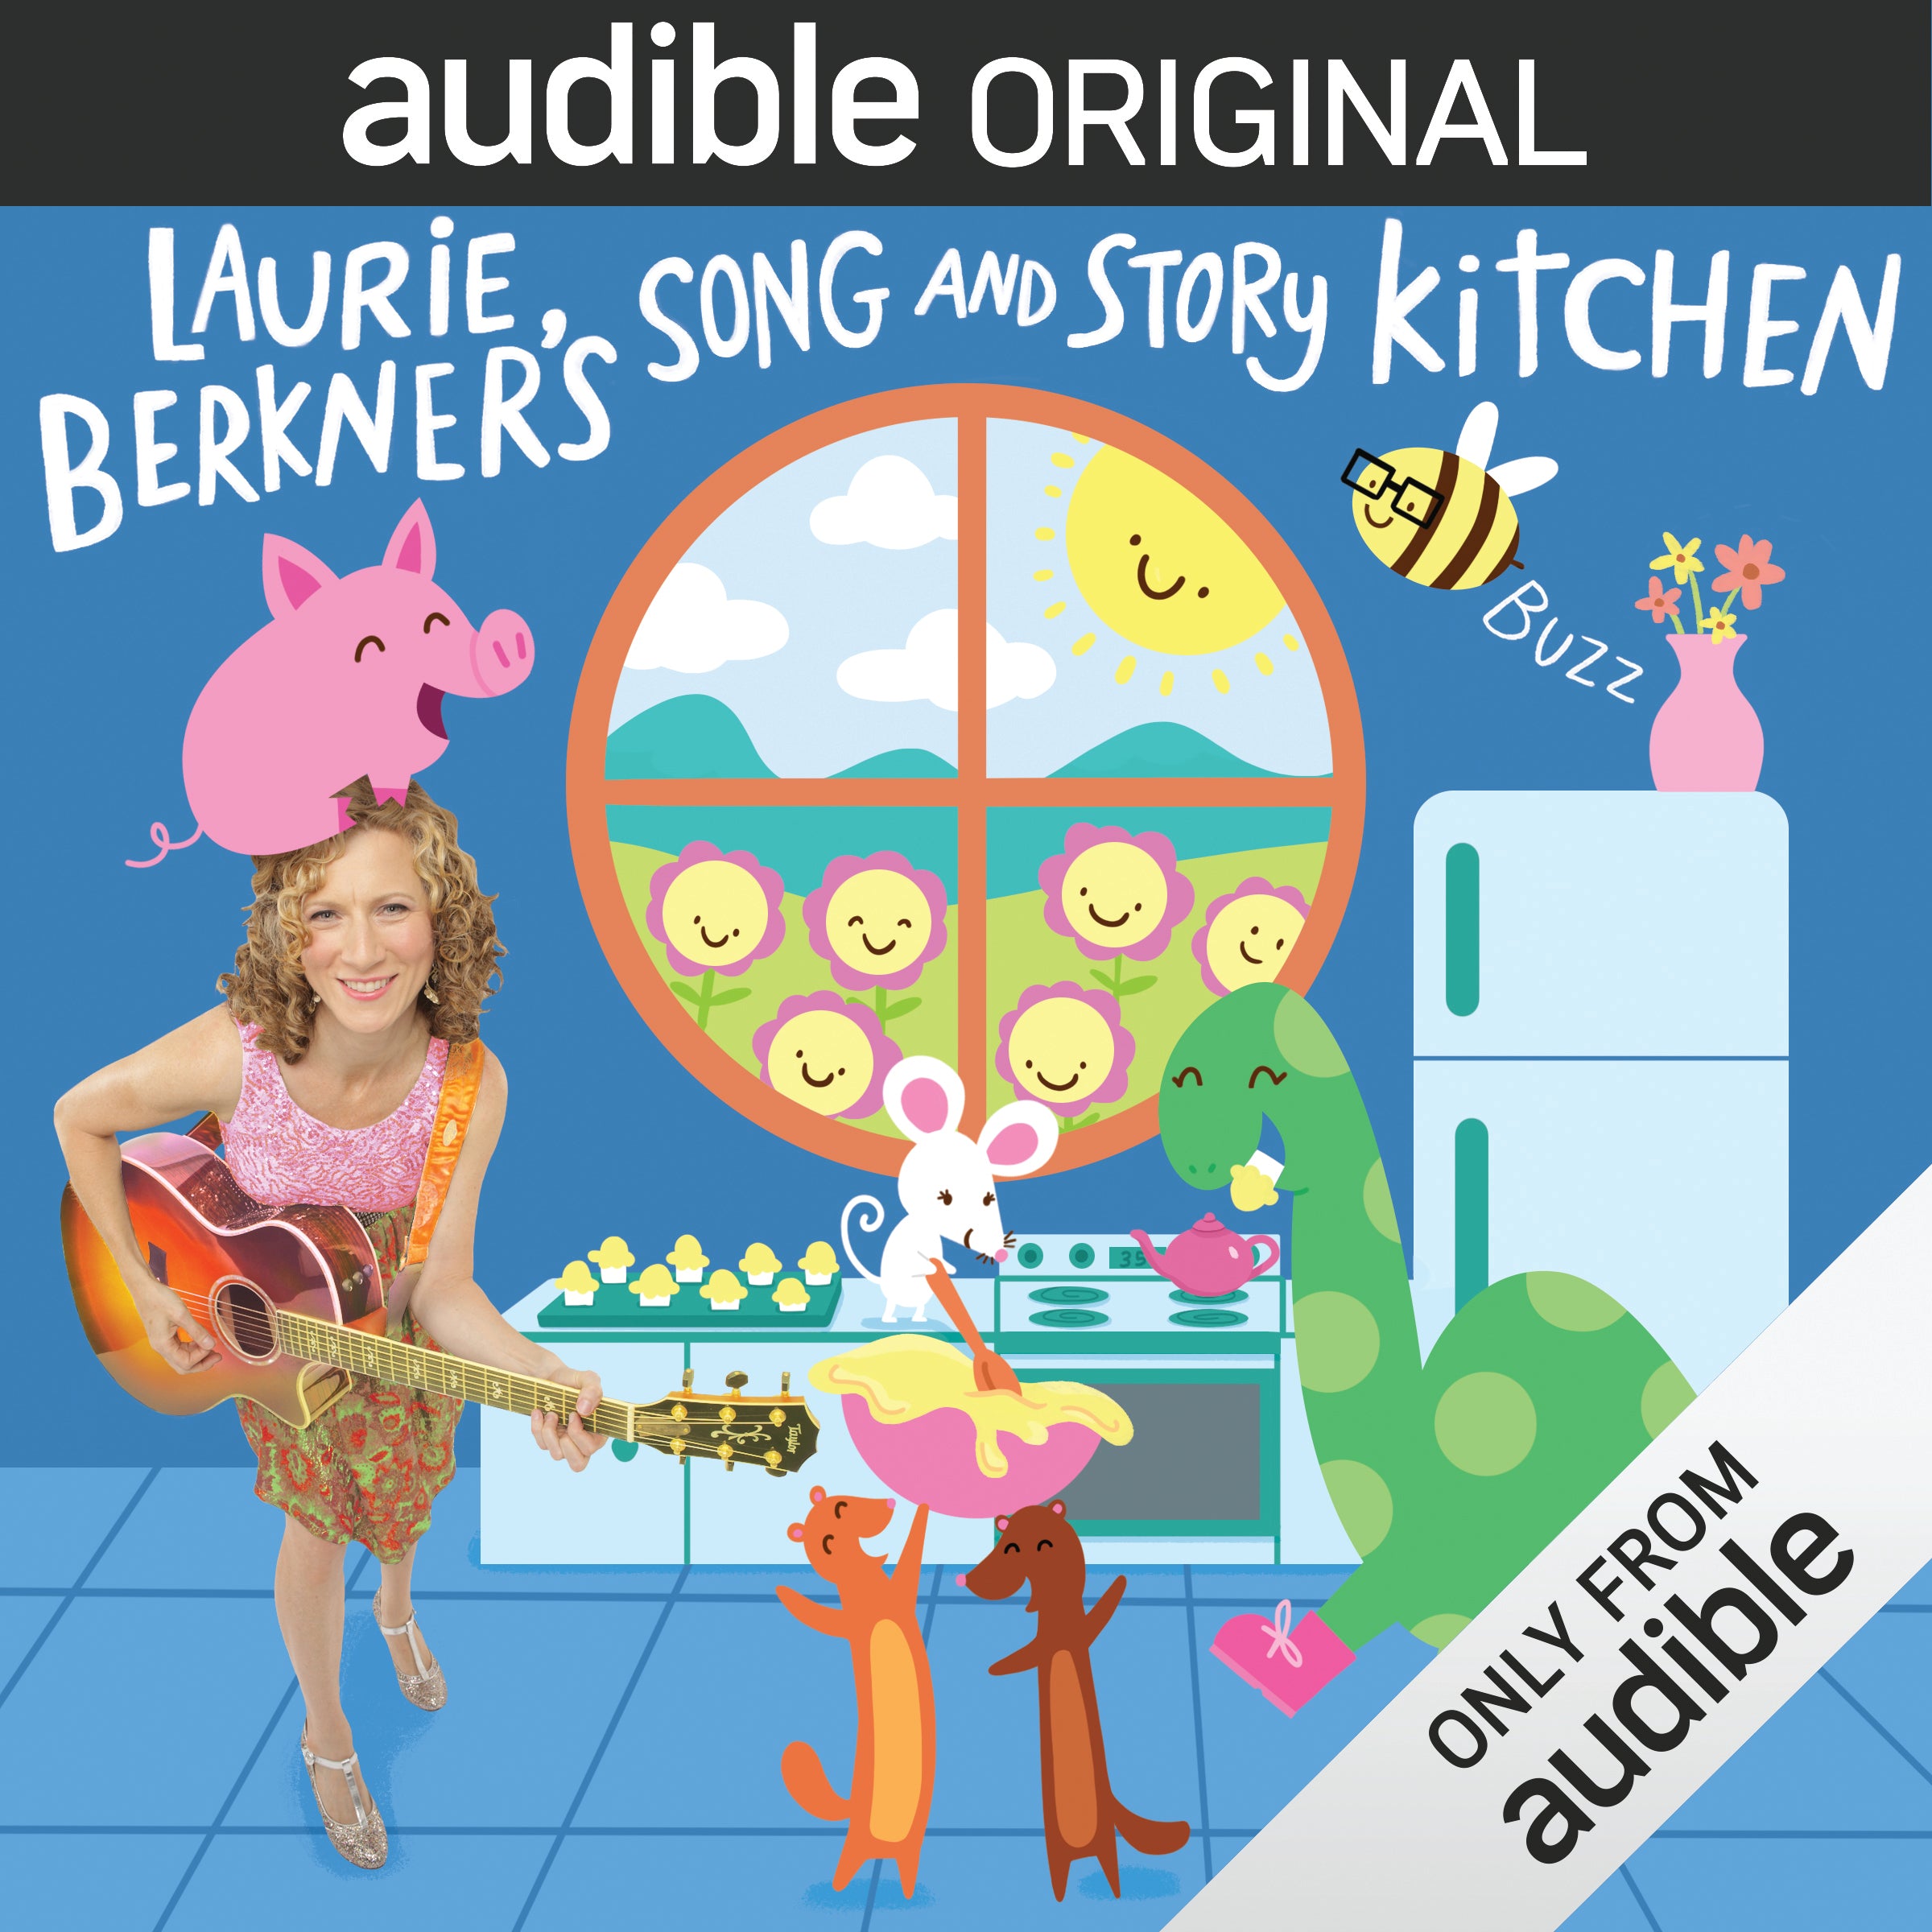 Audible Original: Laurie Berkner's Song and Story Kitchen, Season 1 4 CD set with 10 episodes